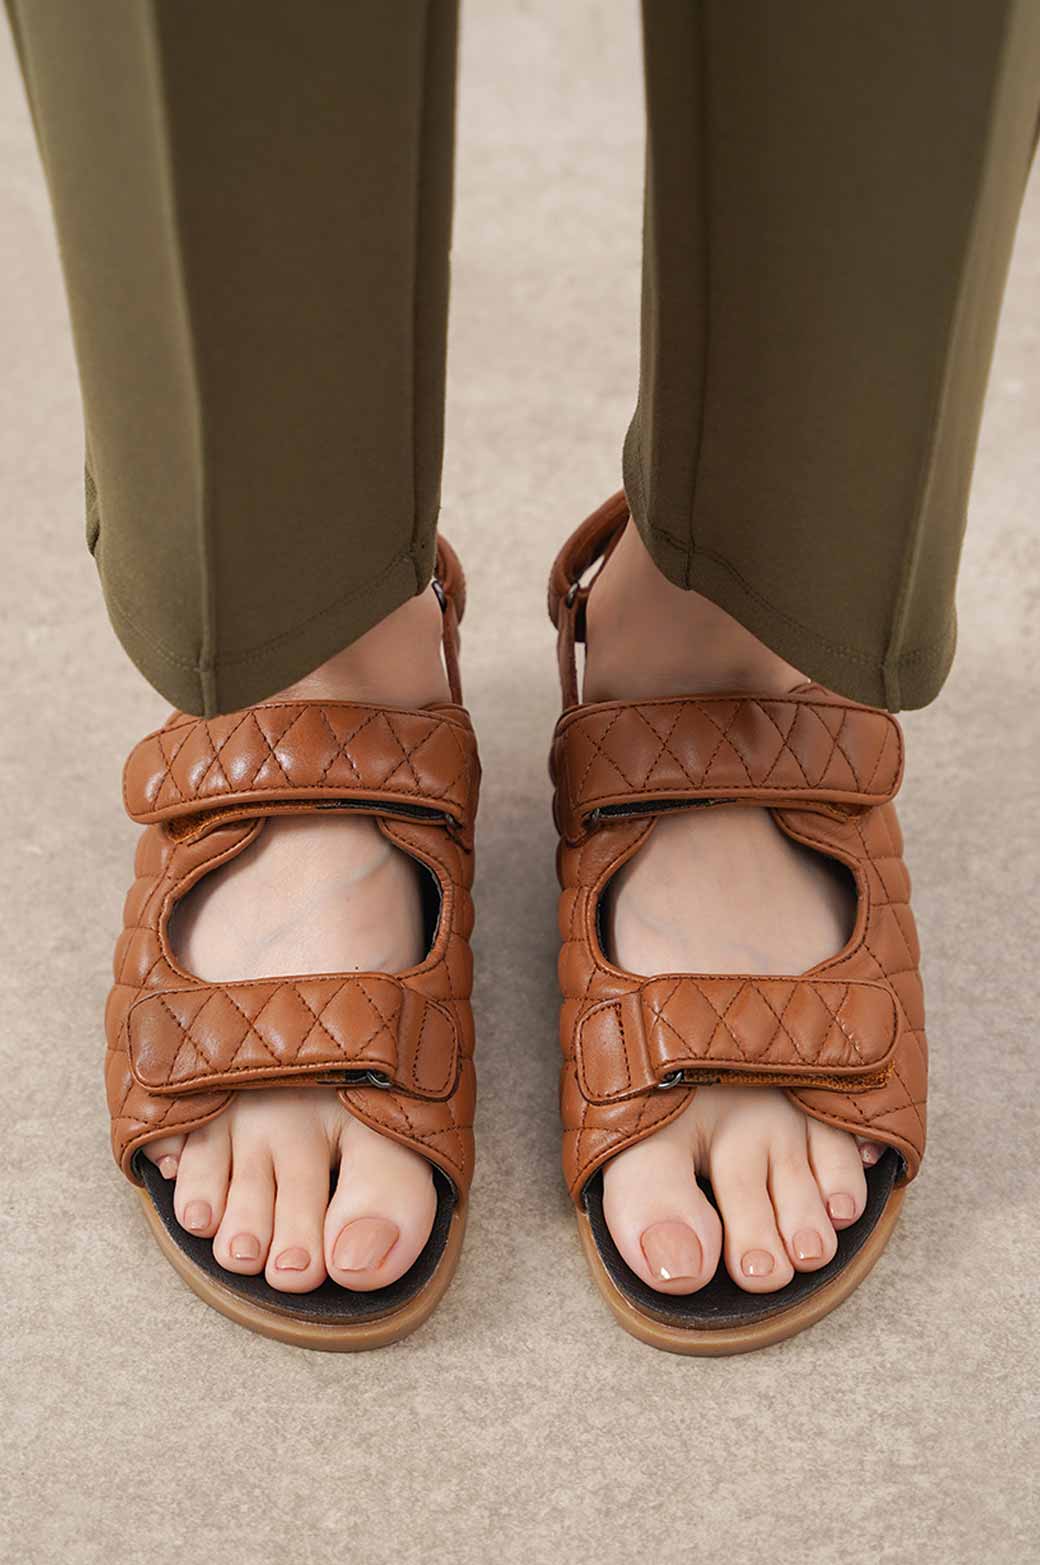 TAN QUILTED SANDALS